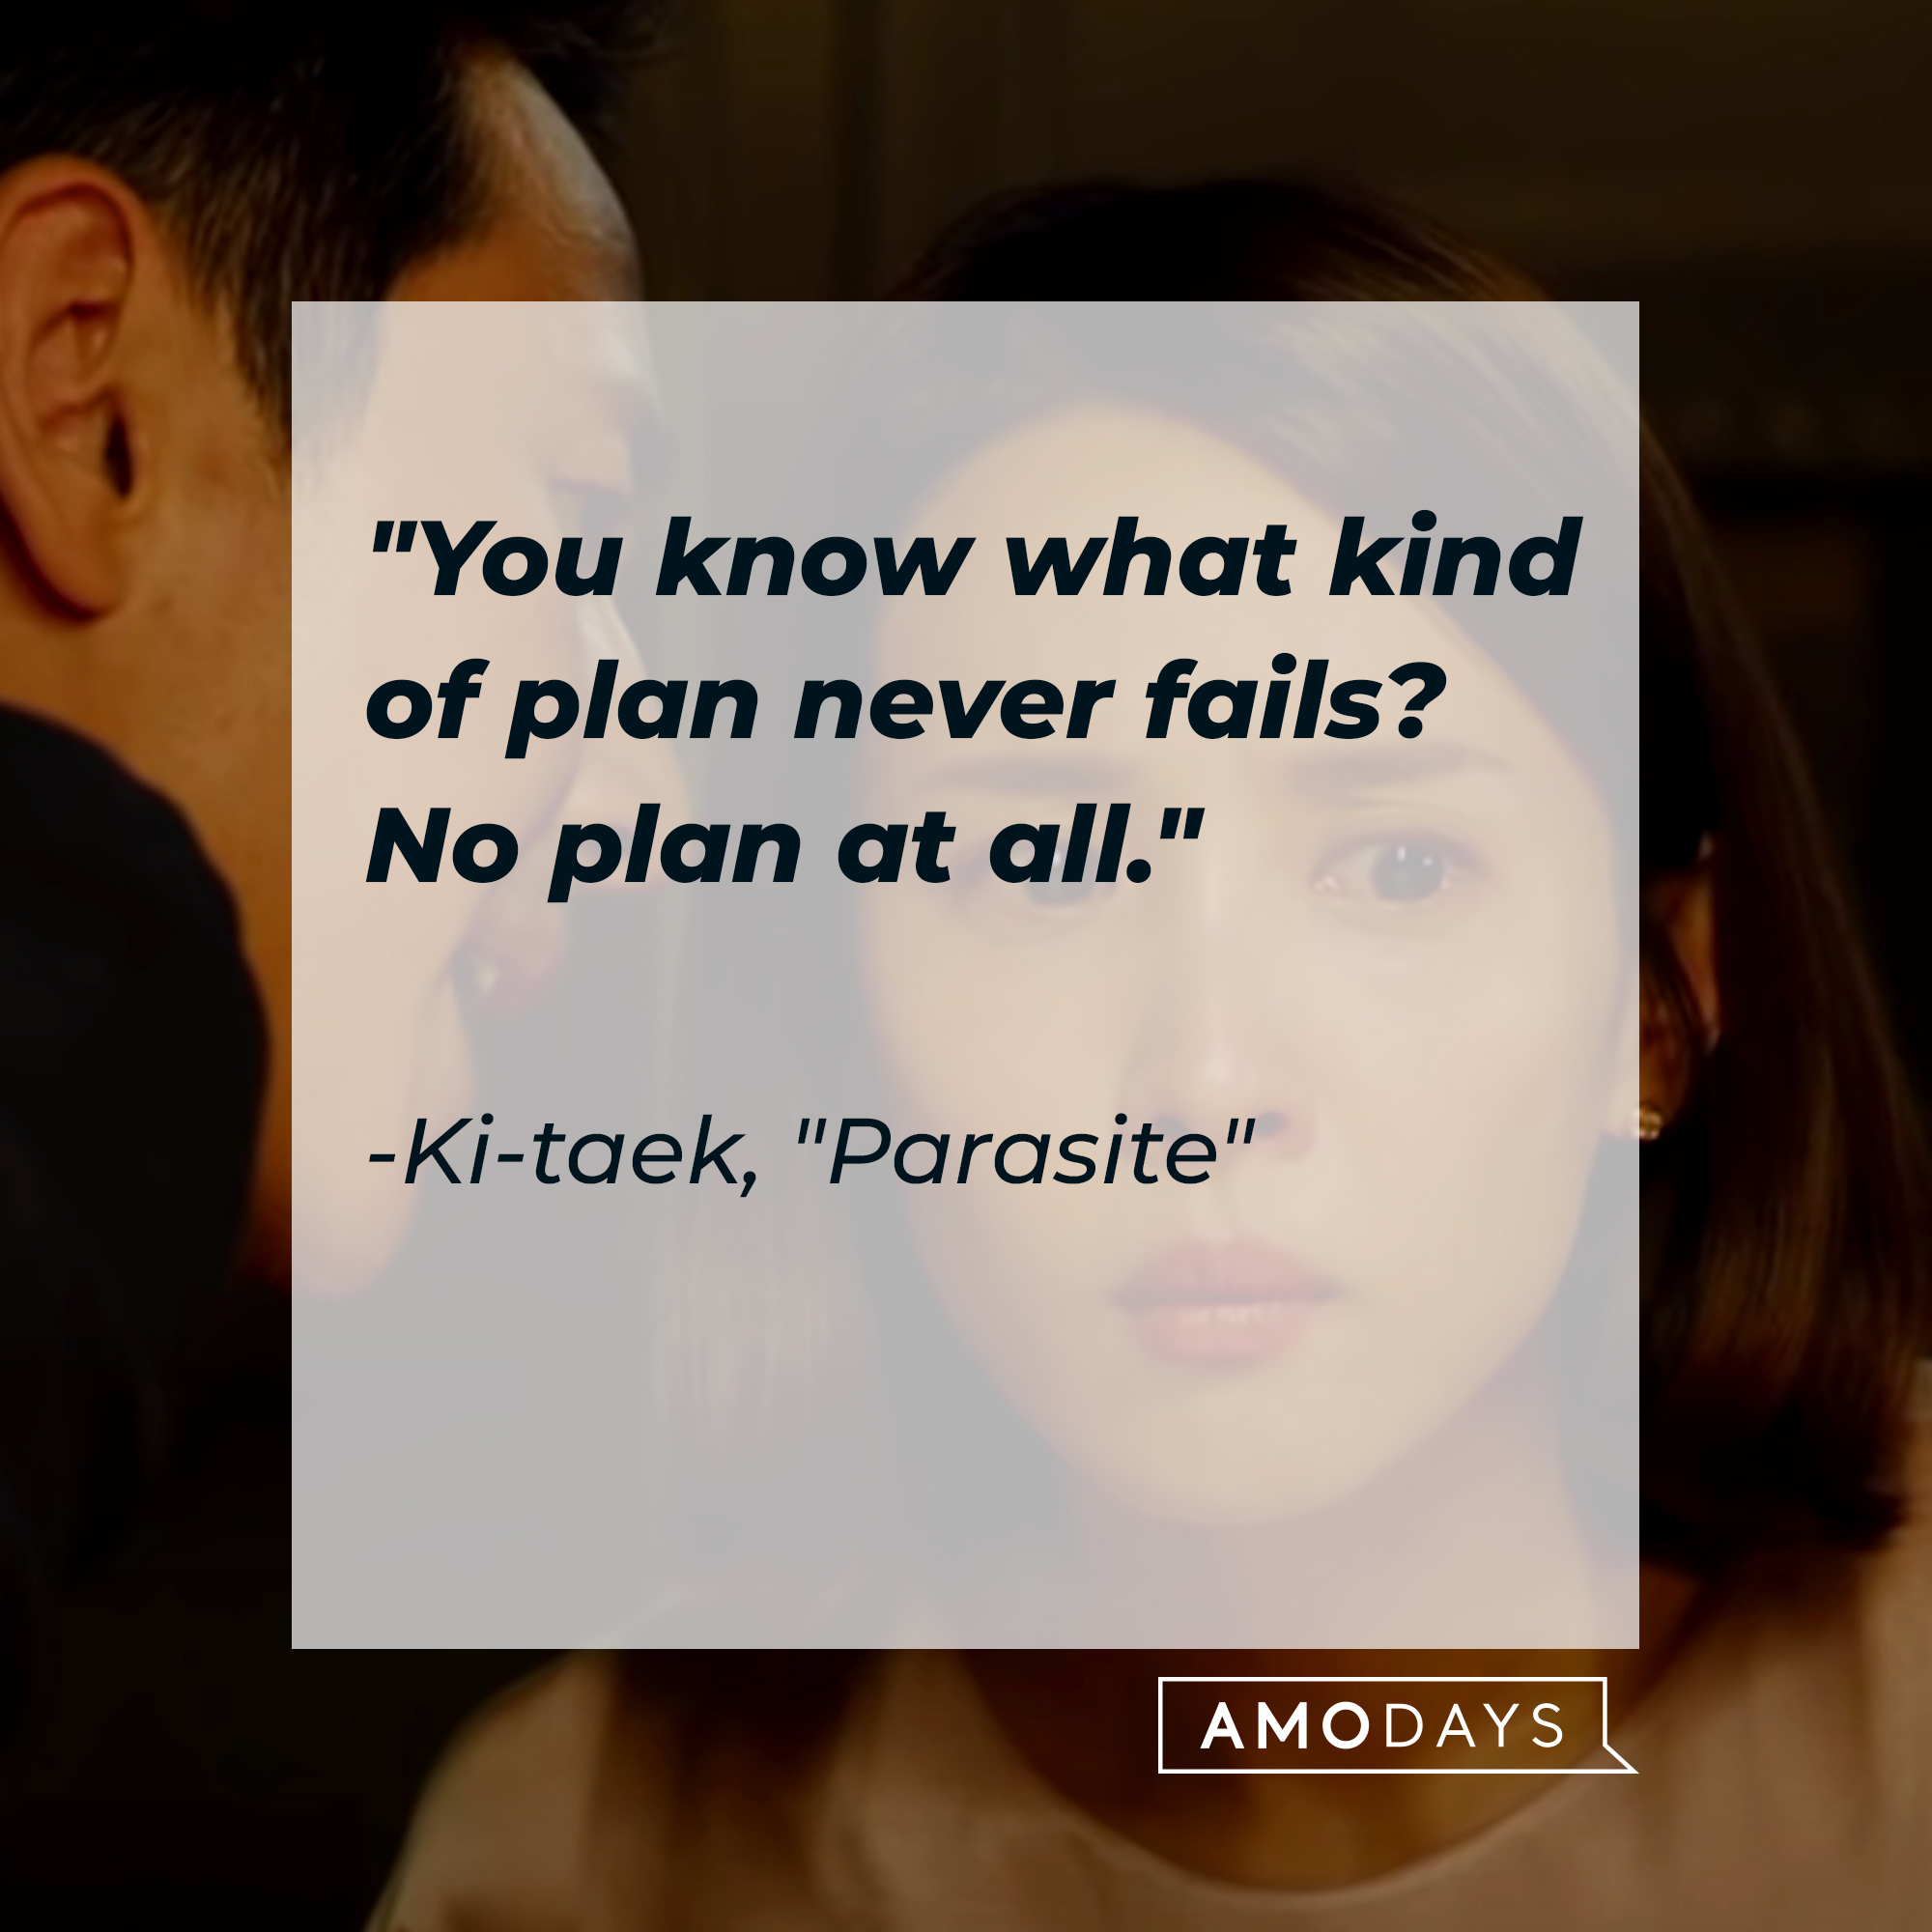 Ki-taek's quote: "You know what kind of plan never fails? No plan at all."  | Source: Facebook.com/ParasiteMovie